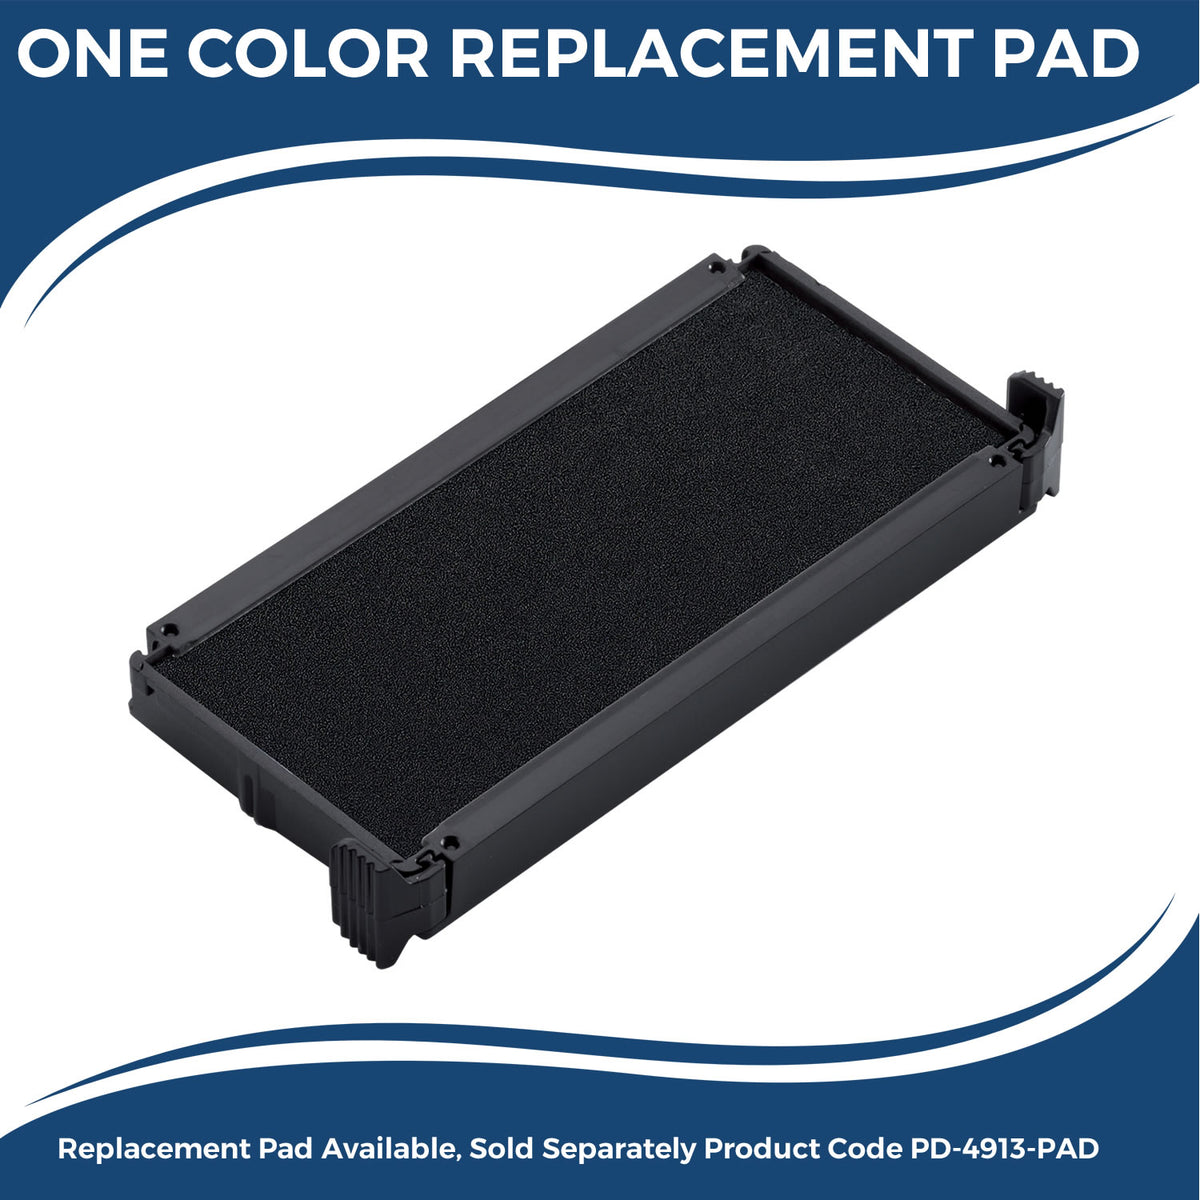 Large Self-Inking Strikeout Stamp 5579S Large Replacment Pad